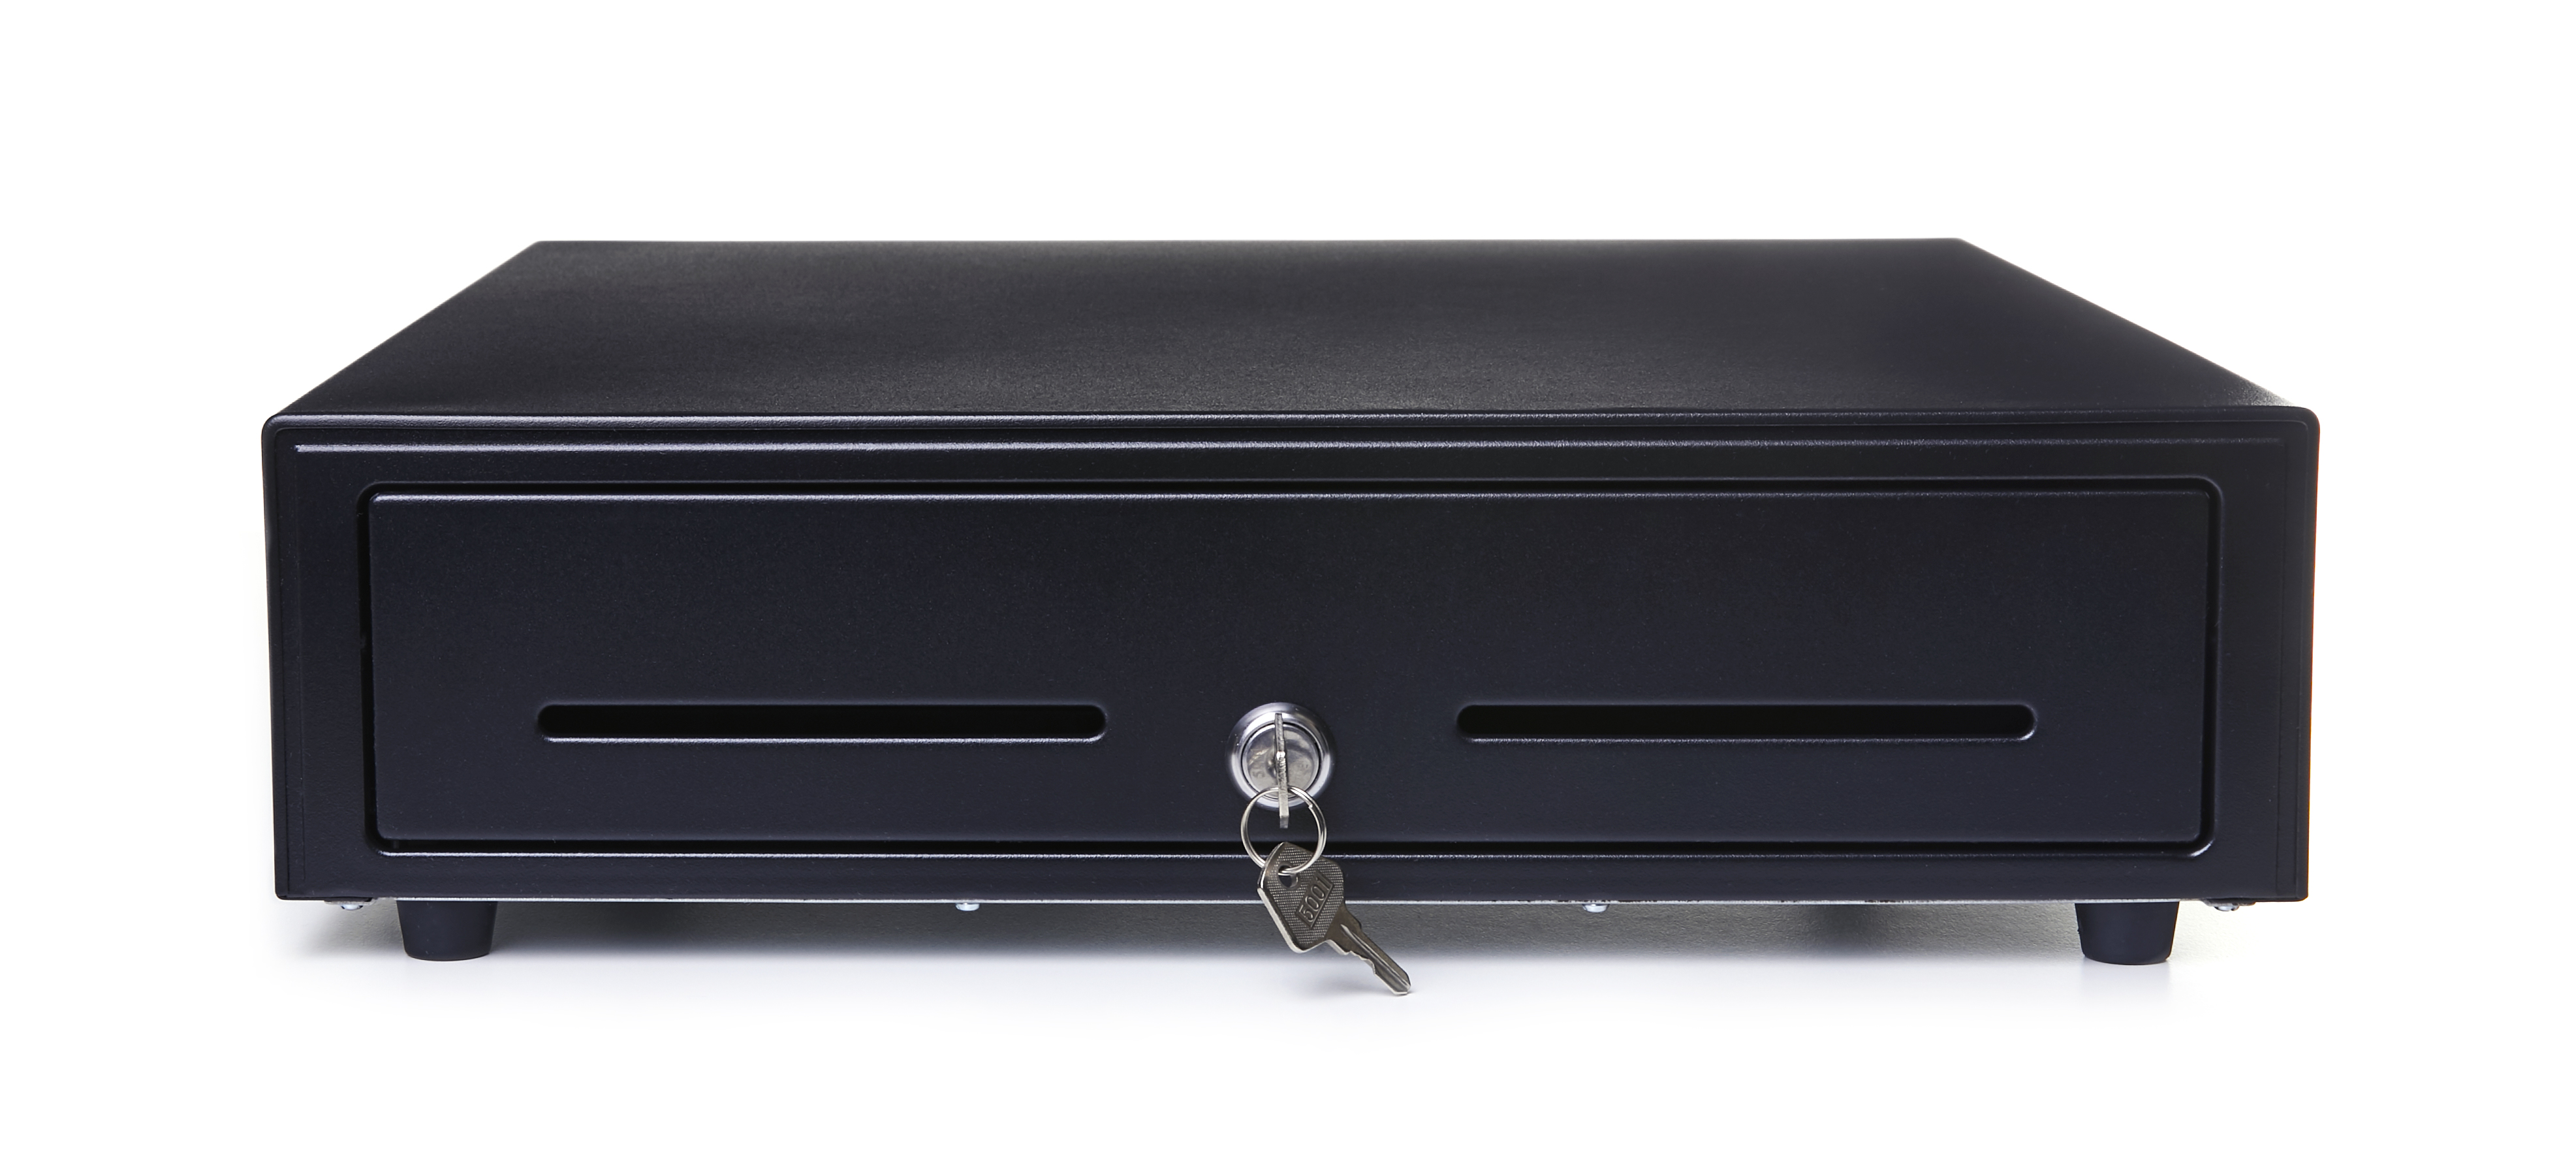 Product_2019_1907_Drawer_FrontView.jpg